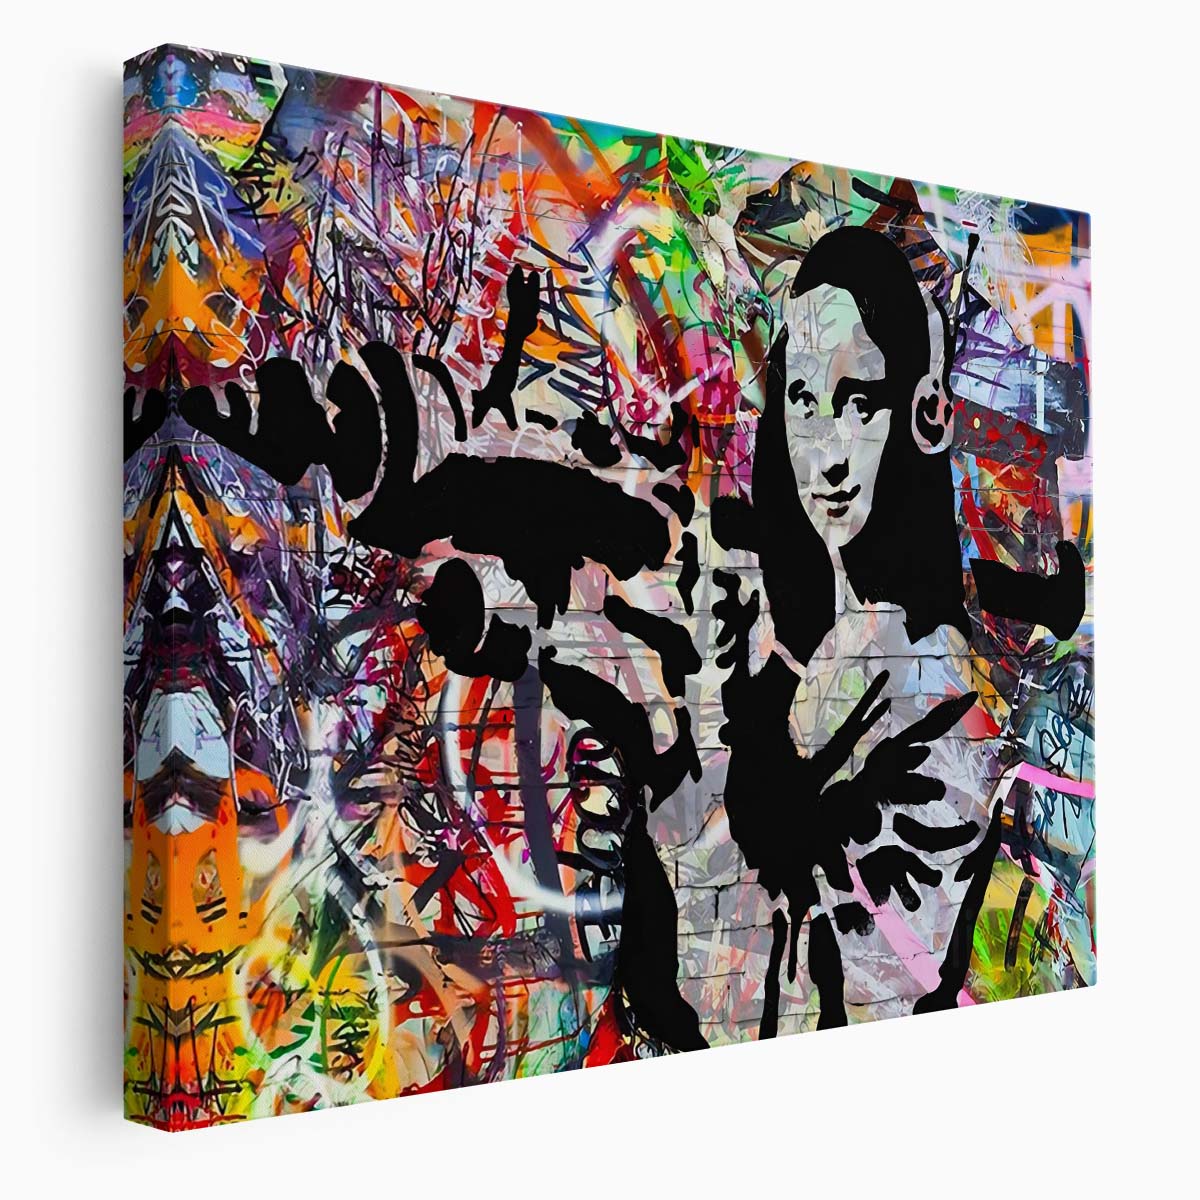 Banksy Mona Lisa with RPG Graffiti Wall Art by Luxuriance Designs. Made in USA.